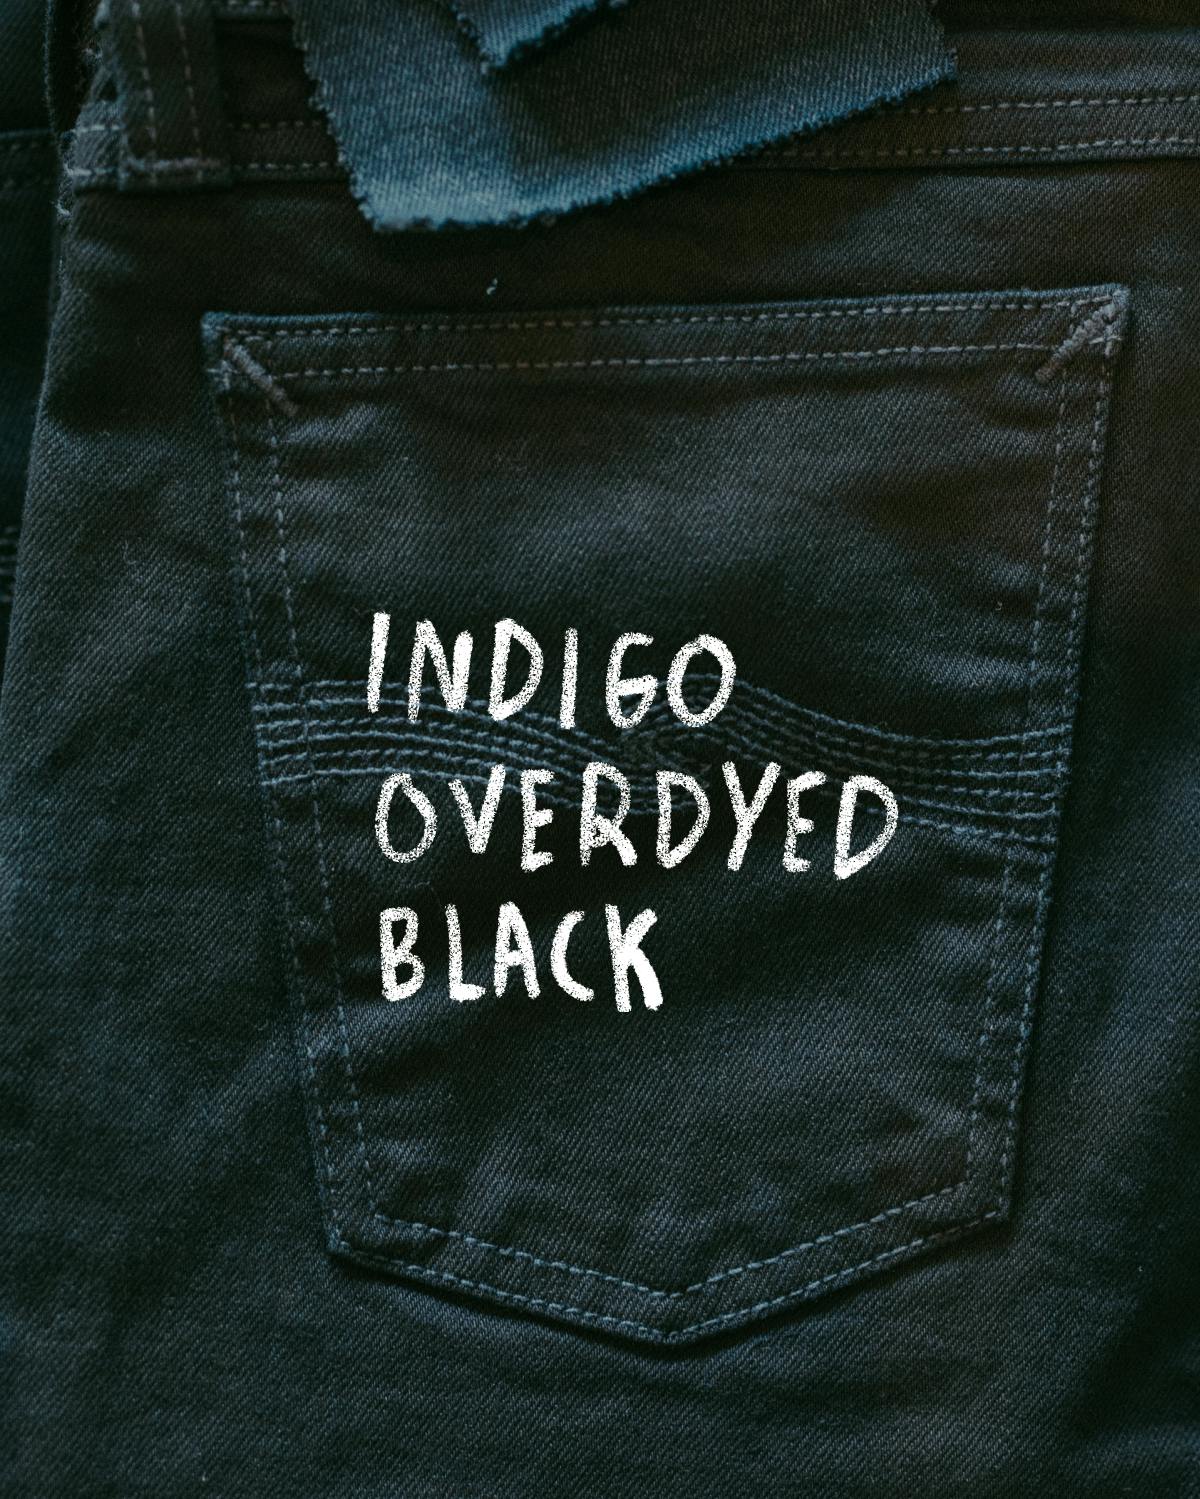 What distinguishes it from “black overdyed black denim” is the way it ages into cold cast shades.